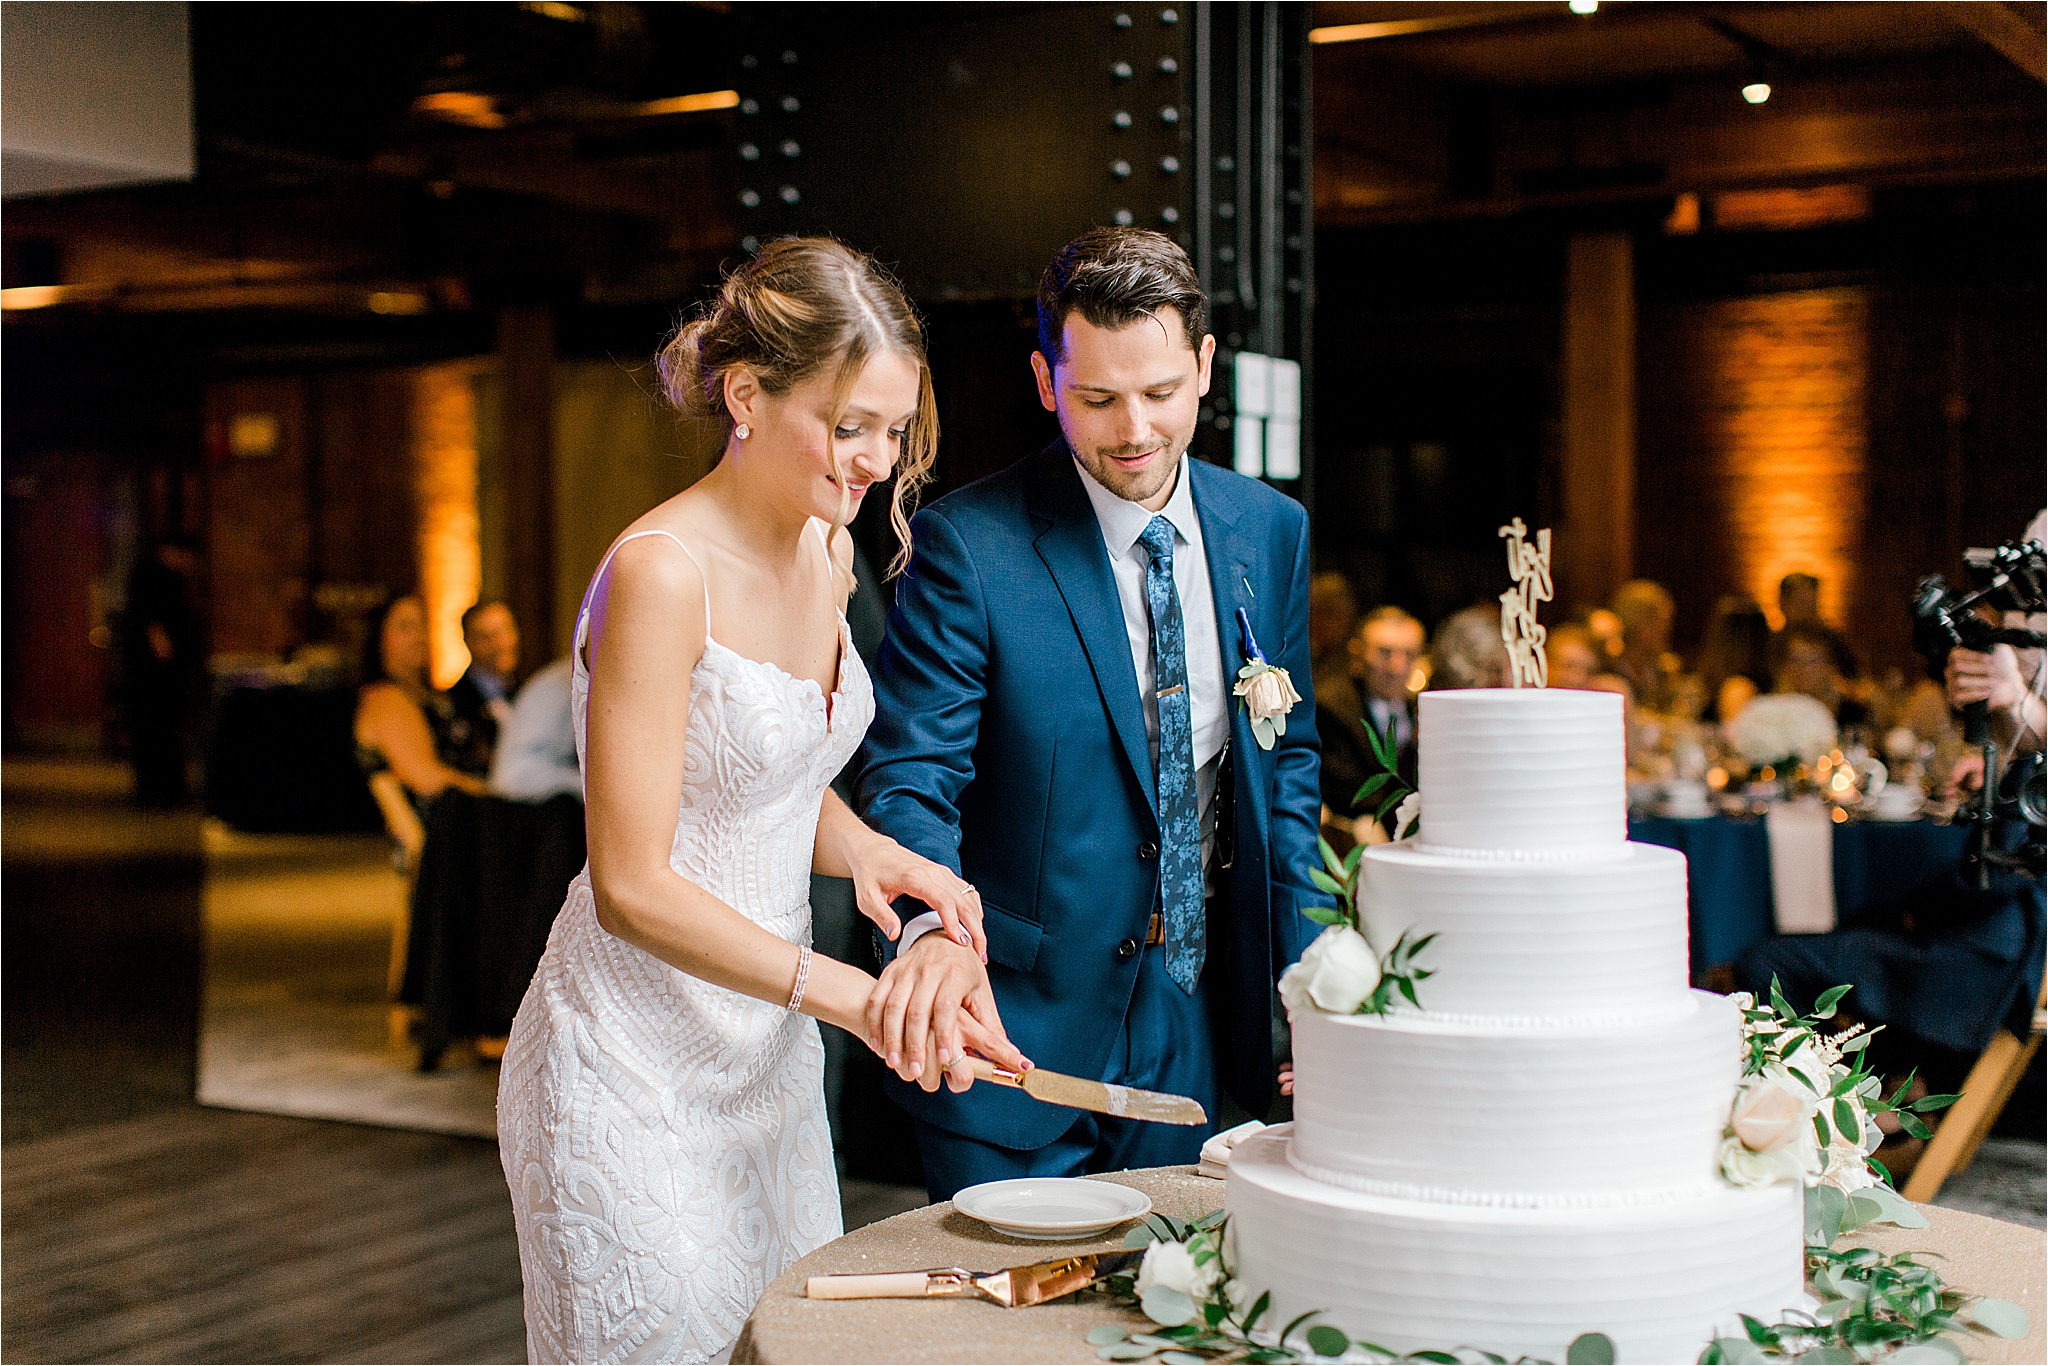 Bride and groom cutting cake by Wild Flour Bakery at Windows on the River